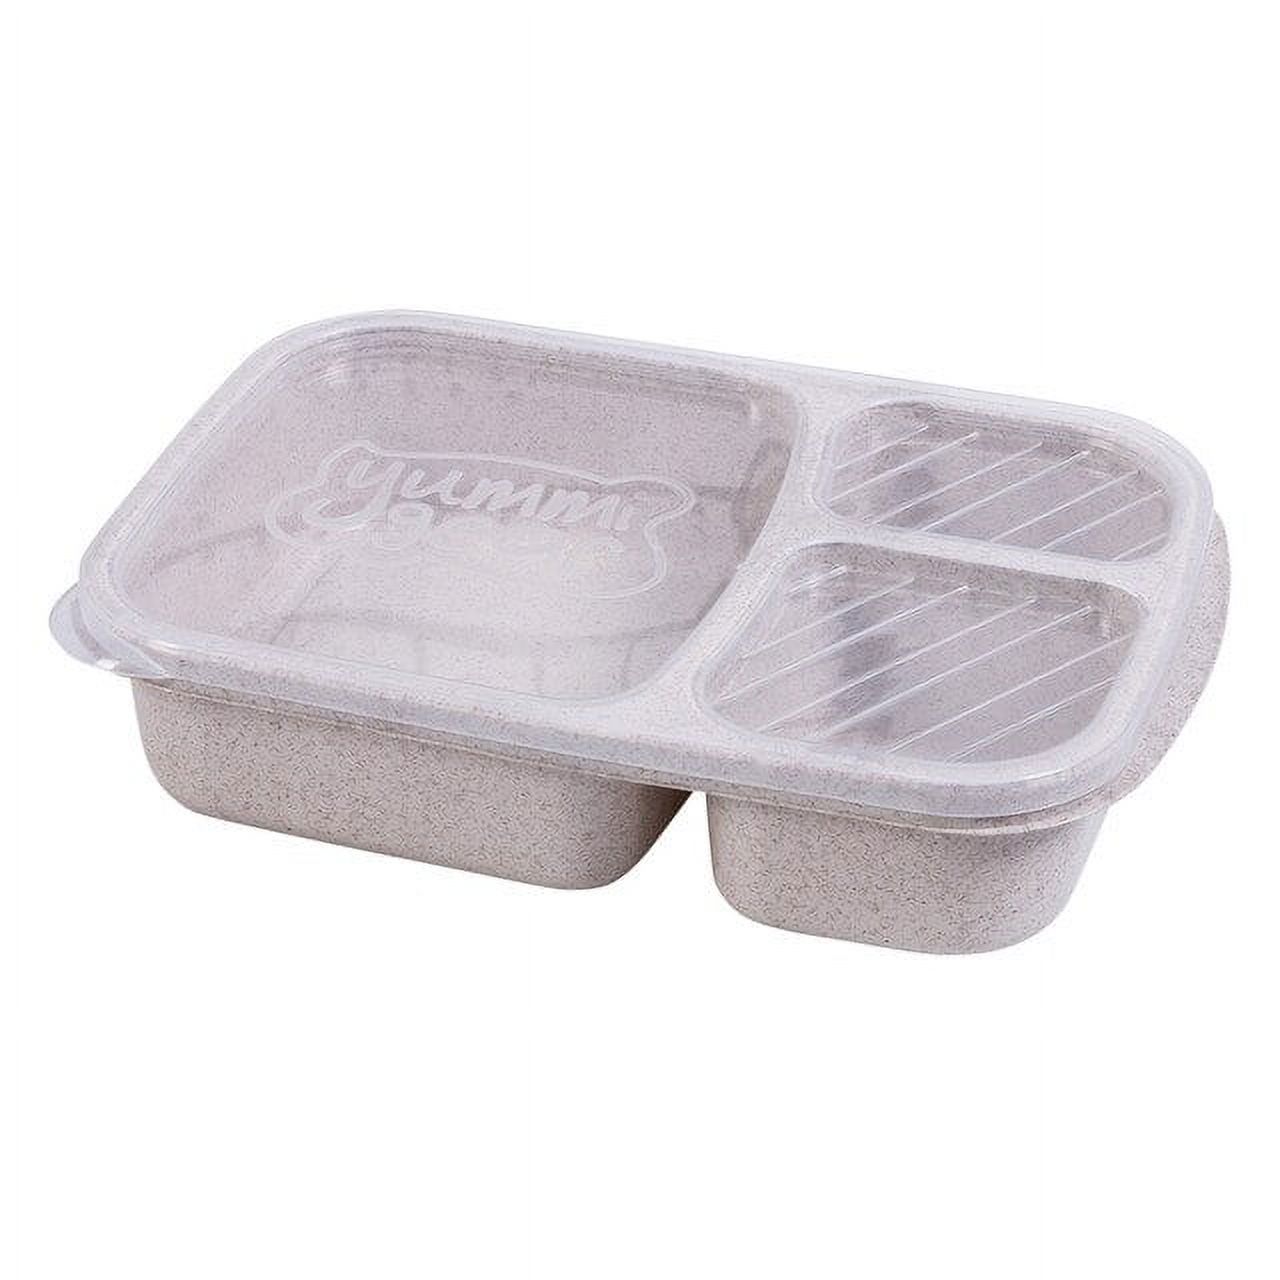 3 Layer Plastic Lunch Box Food Container Bento Lunch Boxes With 3-Compartment Microwave Picnic Food Container Storage Box - image 1 of 5